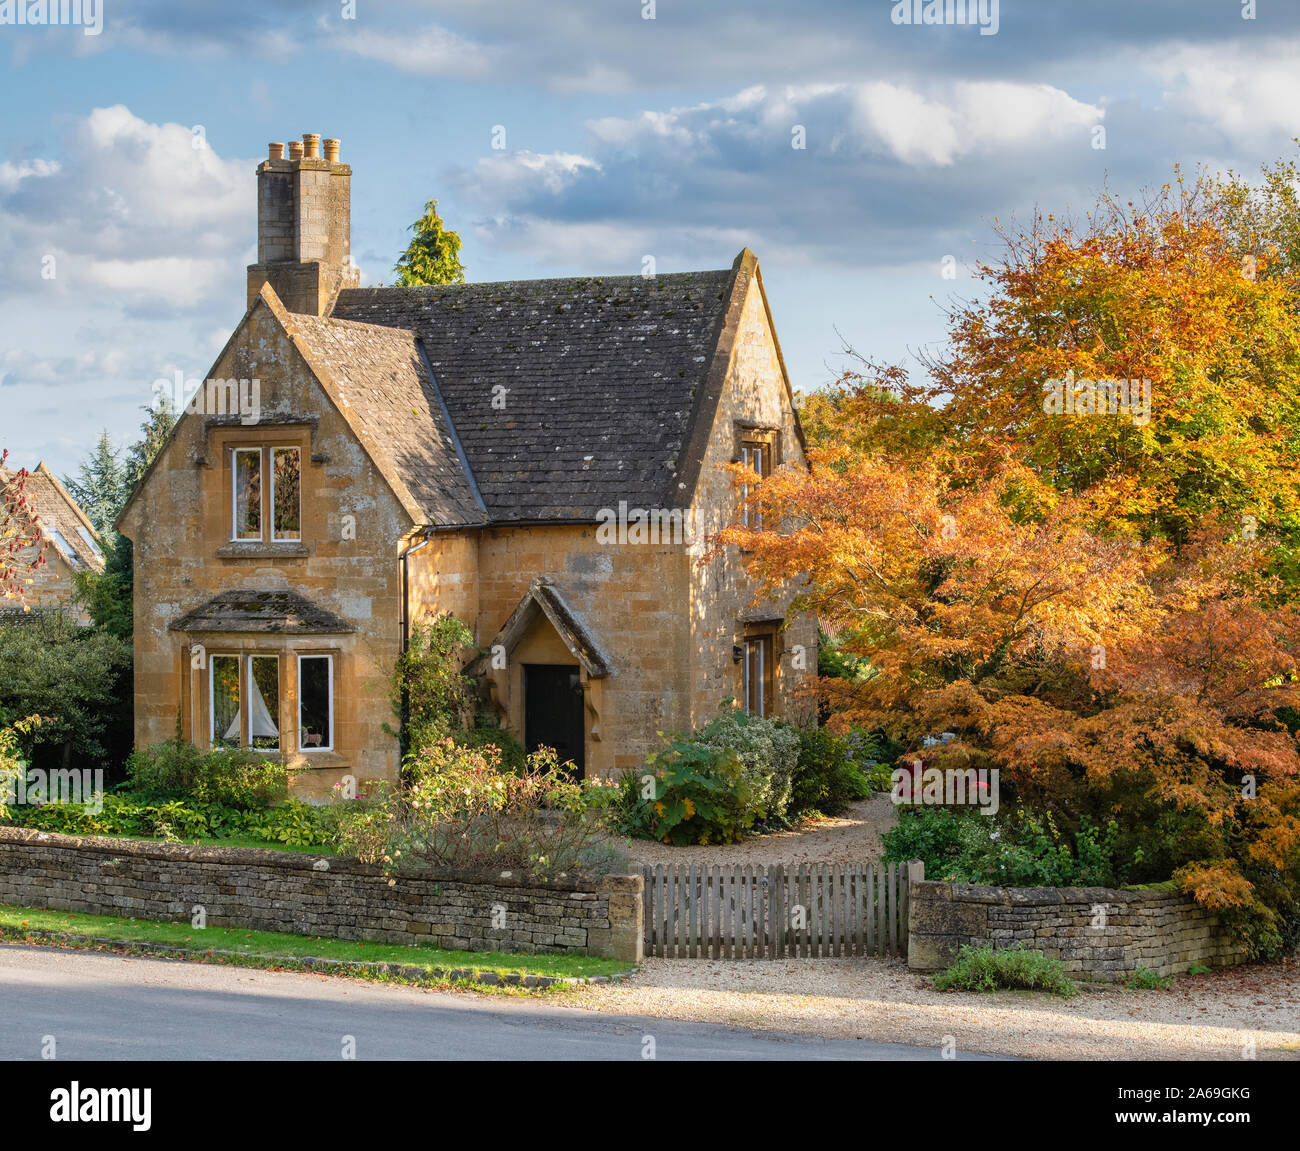 Cotswold stone house in Batsford village in the autumn. Batsford, Moreton-in-Marsh, Cotswolds, Gloucestershire, England Stock Photo